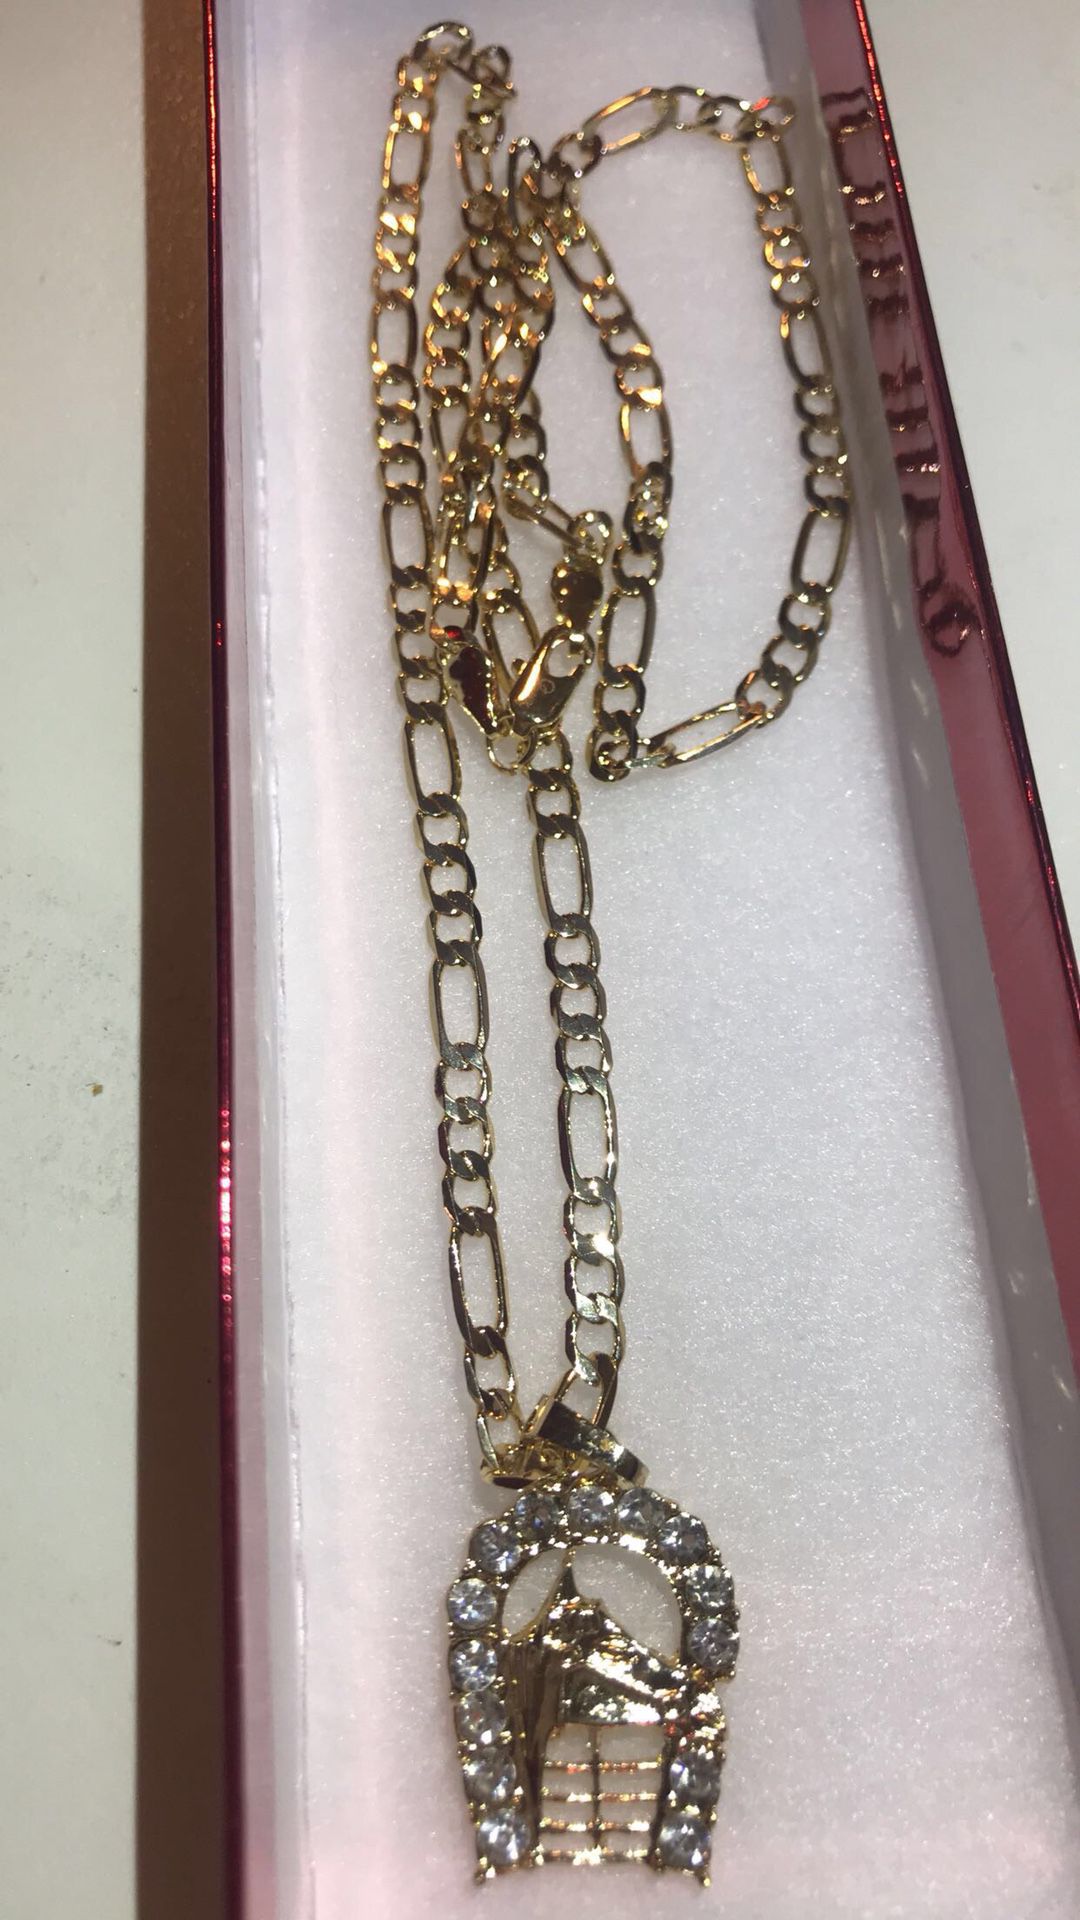 Chain with horse pendant